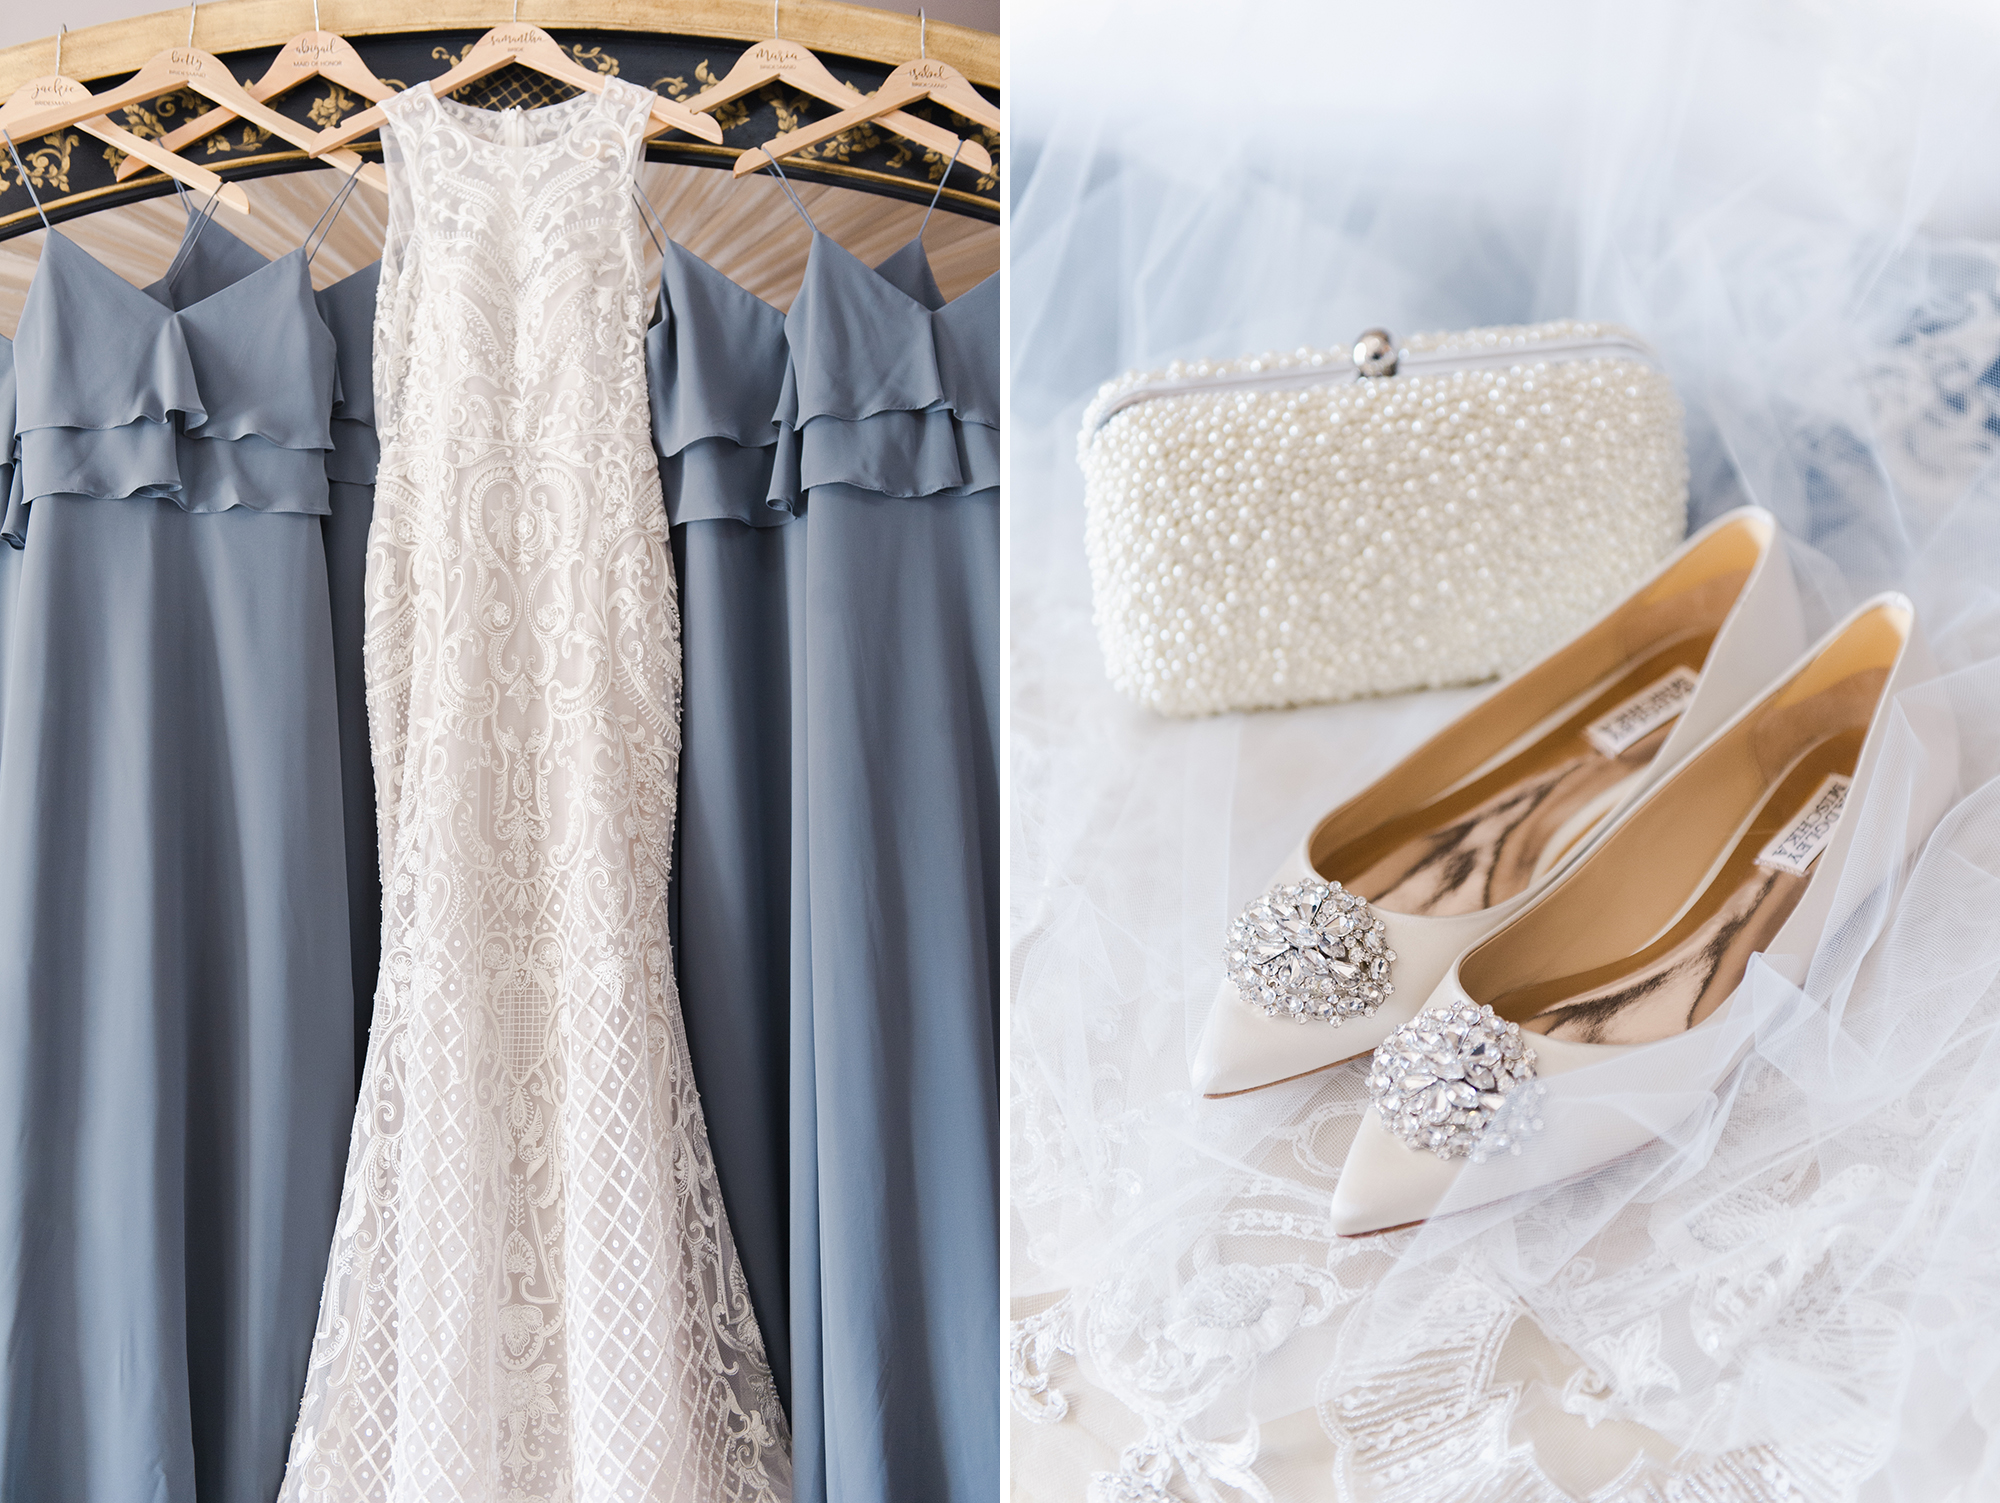 Wedding dress and accessories, bridesmaids' dresses